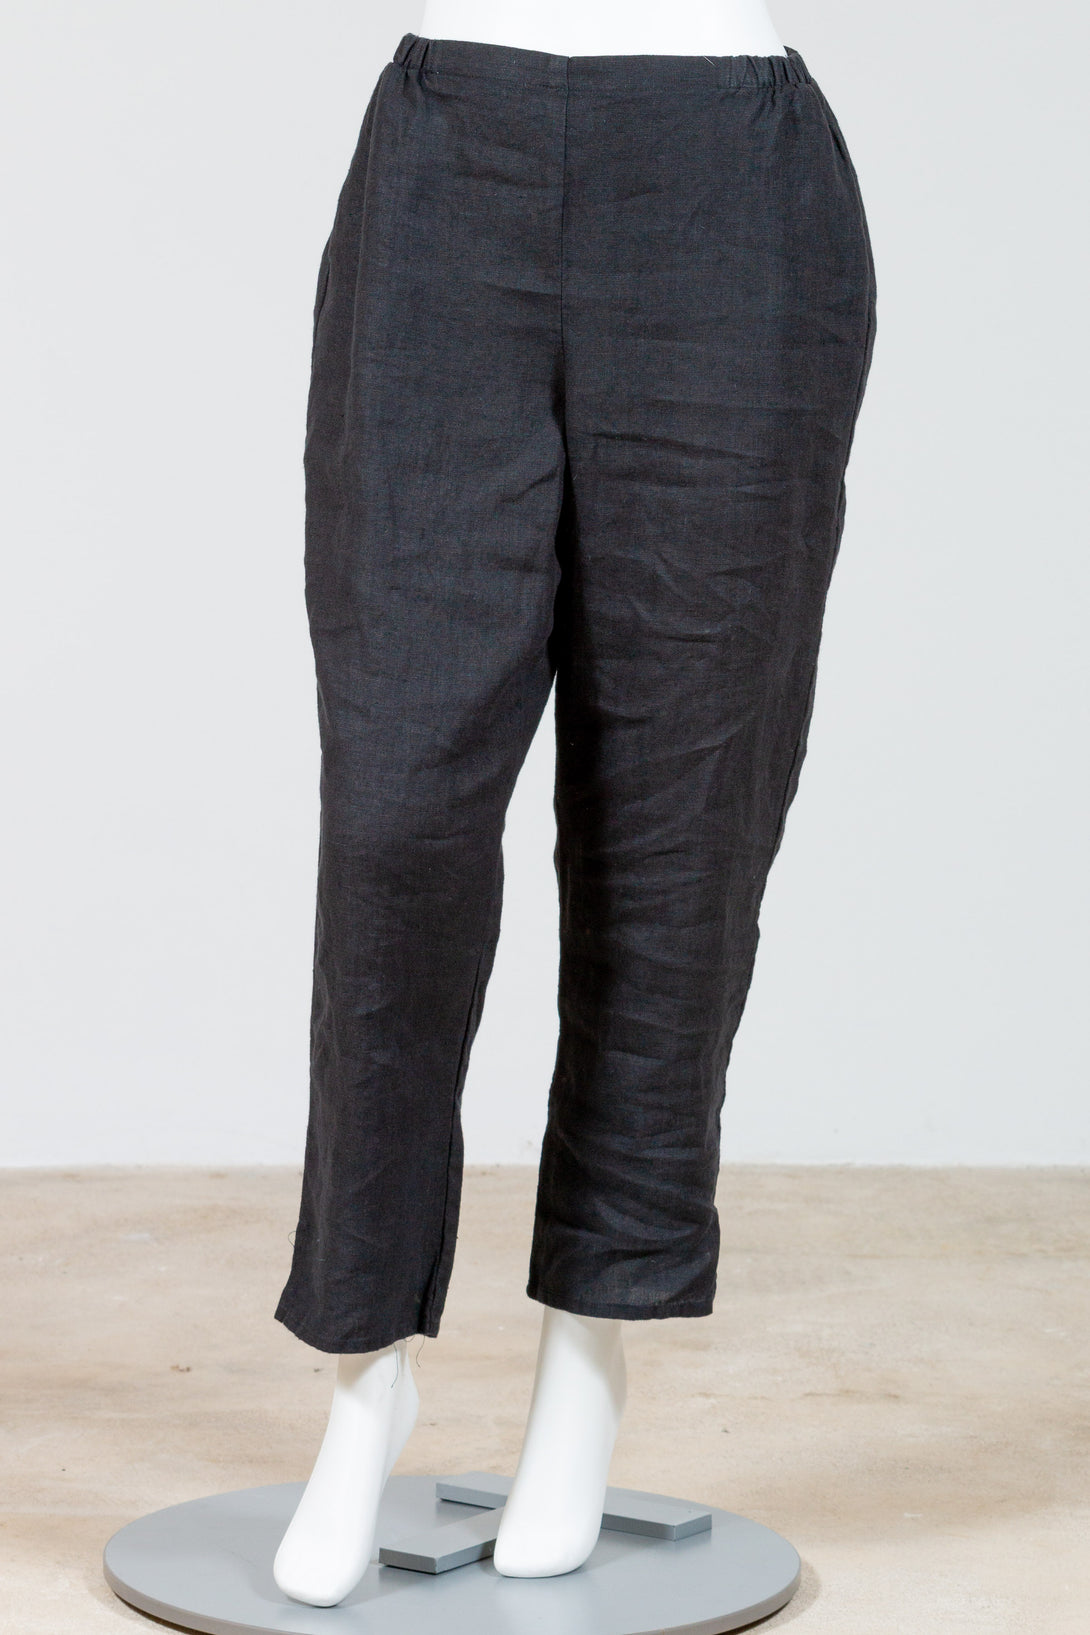 FLAX Pocketed Ankle Pant